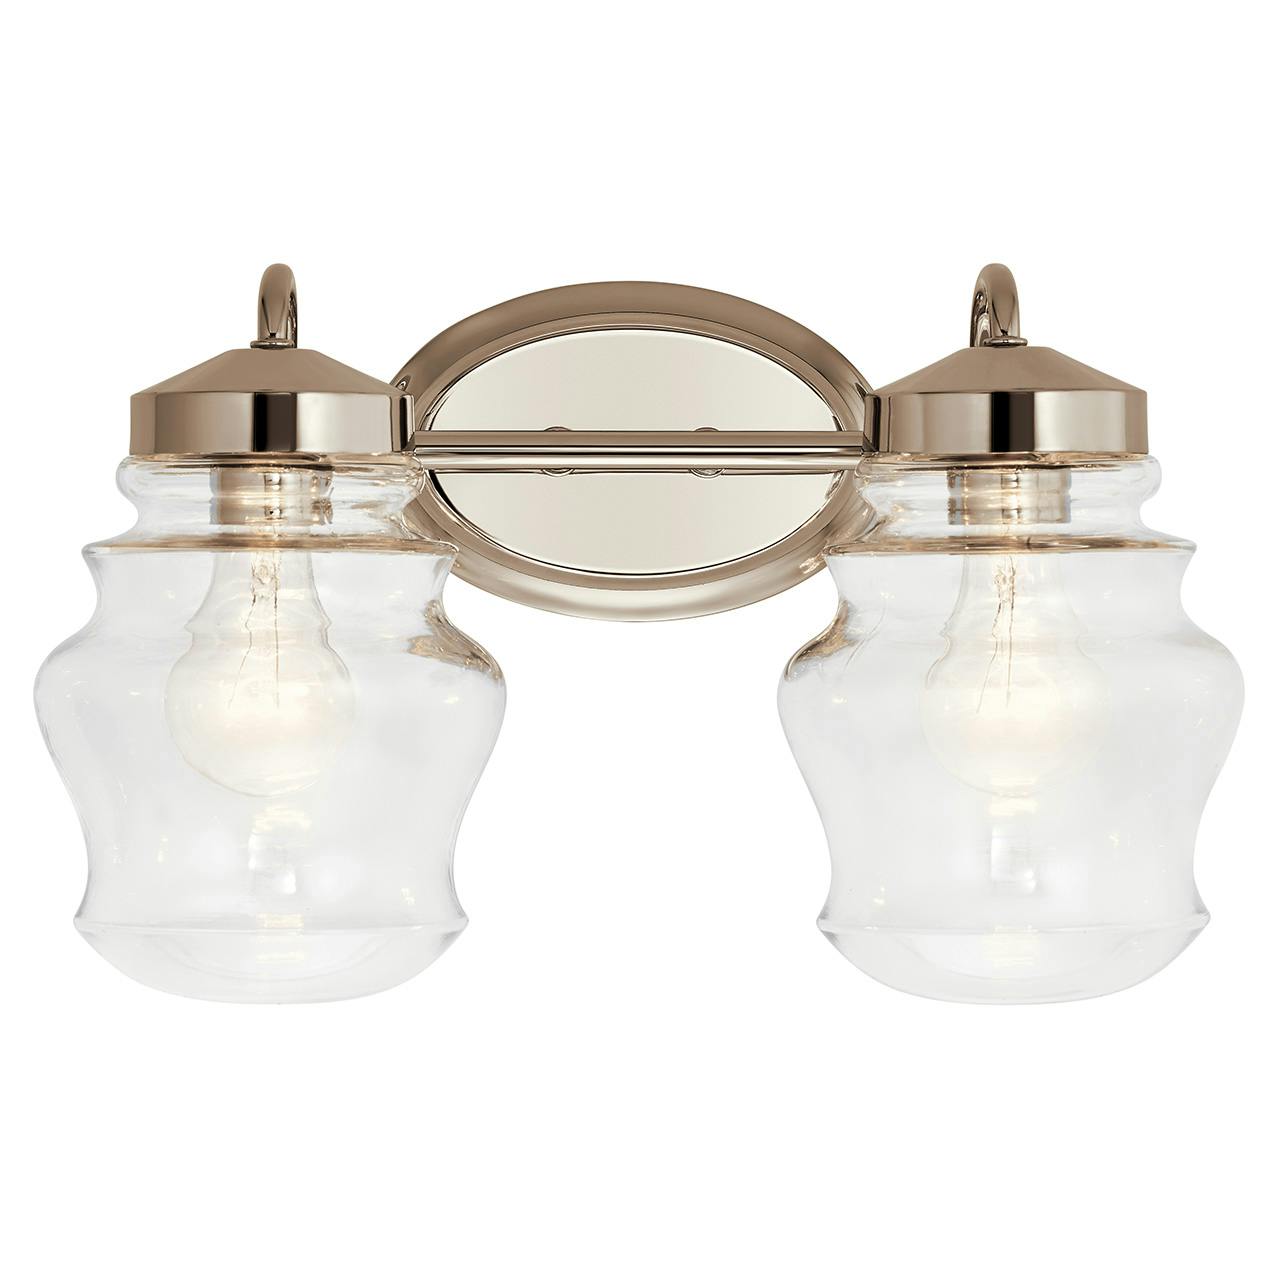 The Janiel 2 Light Vanity Light Nickel facing down on a white background